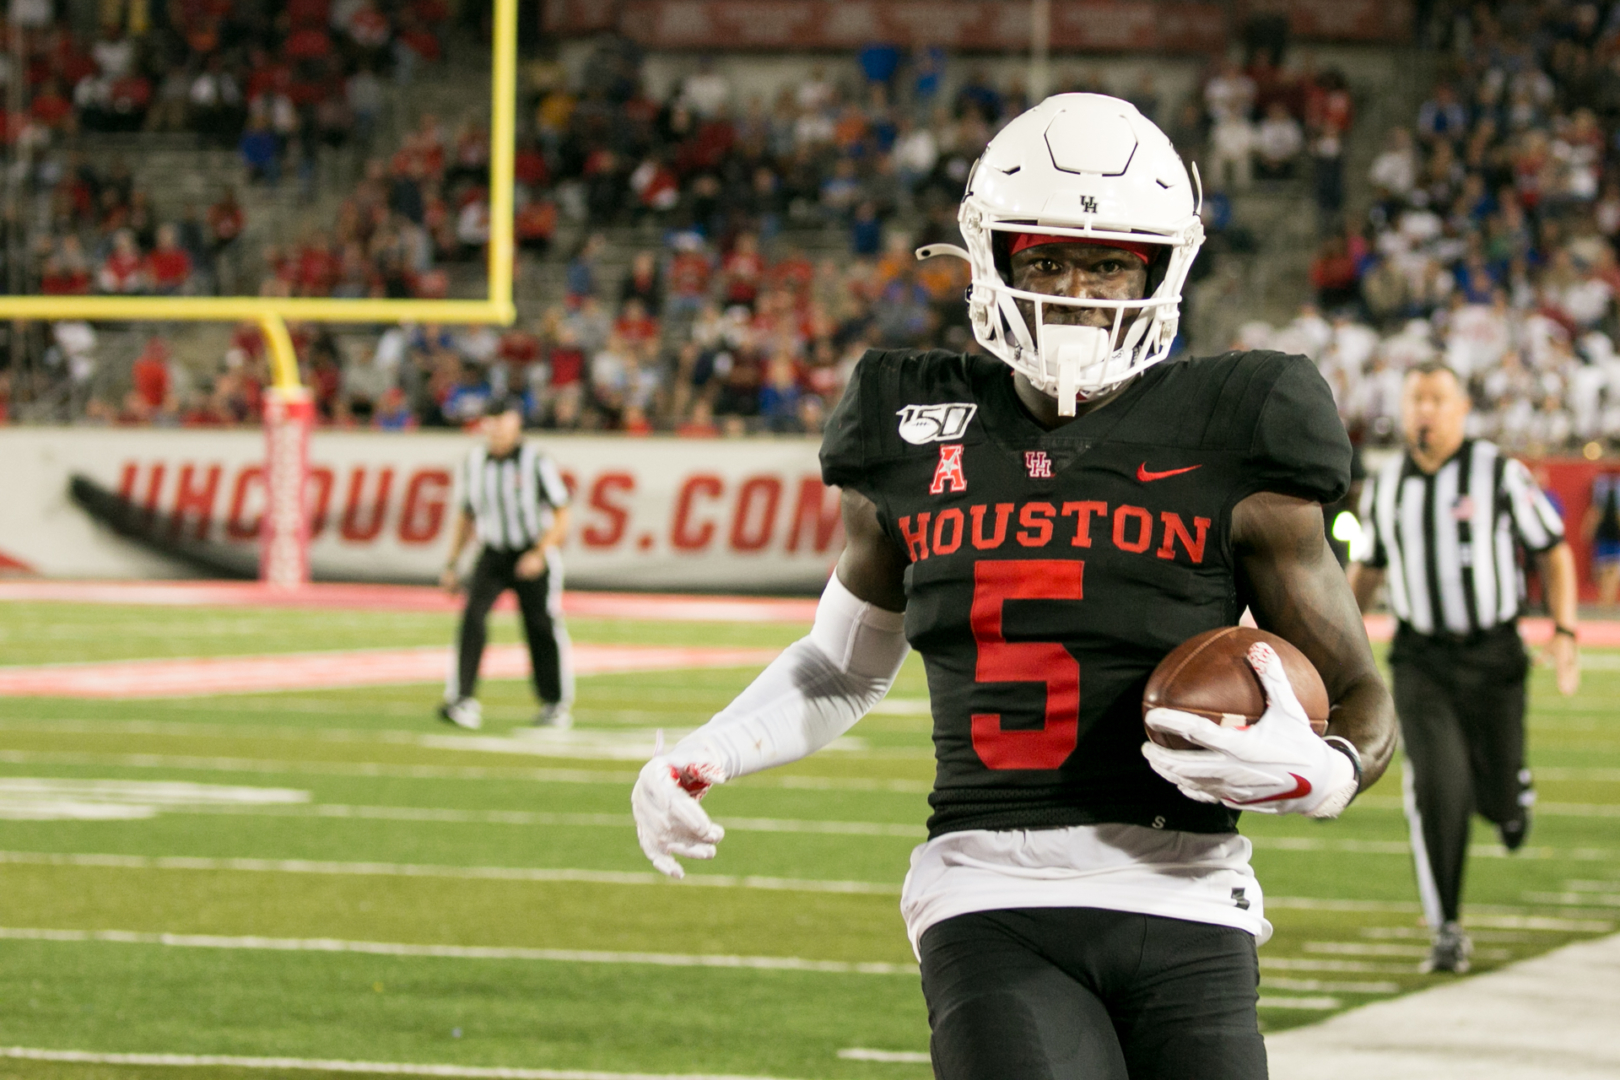 UH wide receiver Marquez Stevenson in a game against SMU in 2019. He caught five passes for 211 yards and two touchdowns, including a 96-yard score in the fourth quarter. | Katrina Martinez/The Cougar